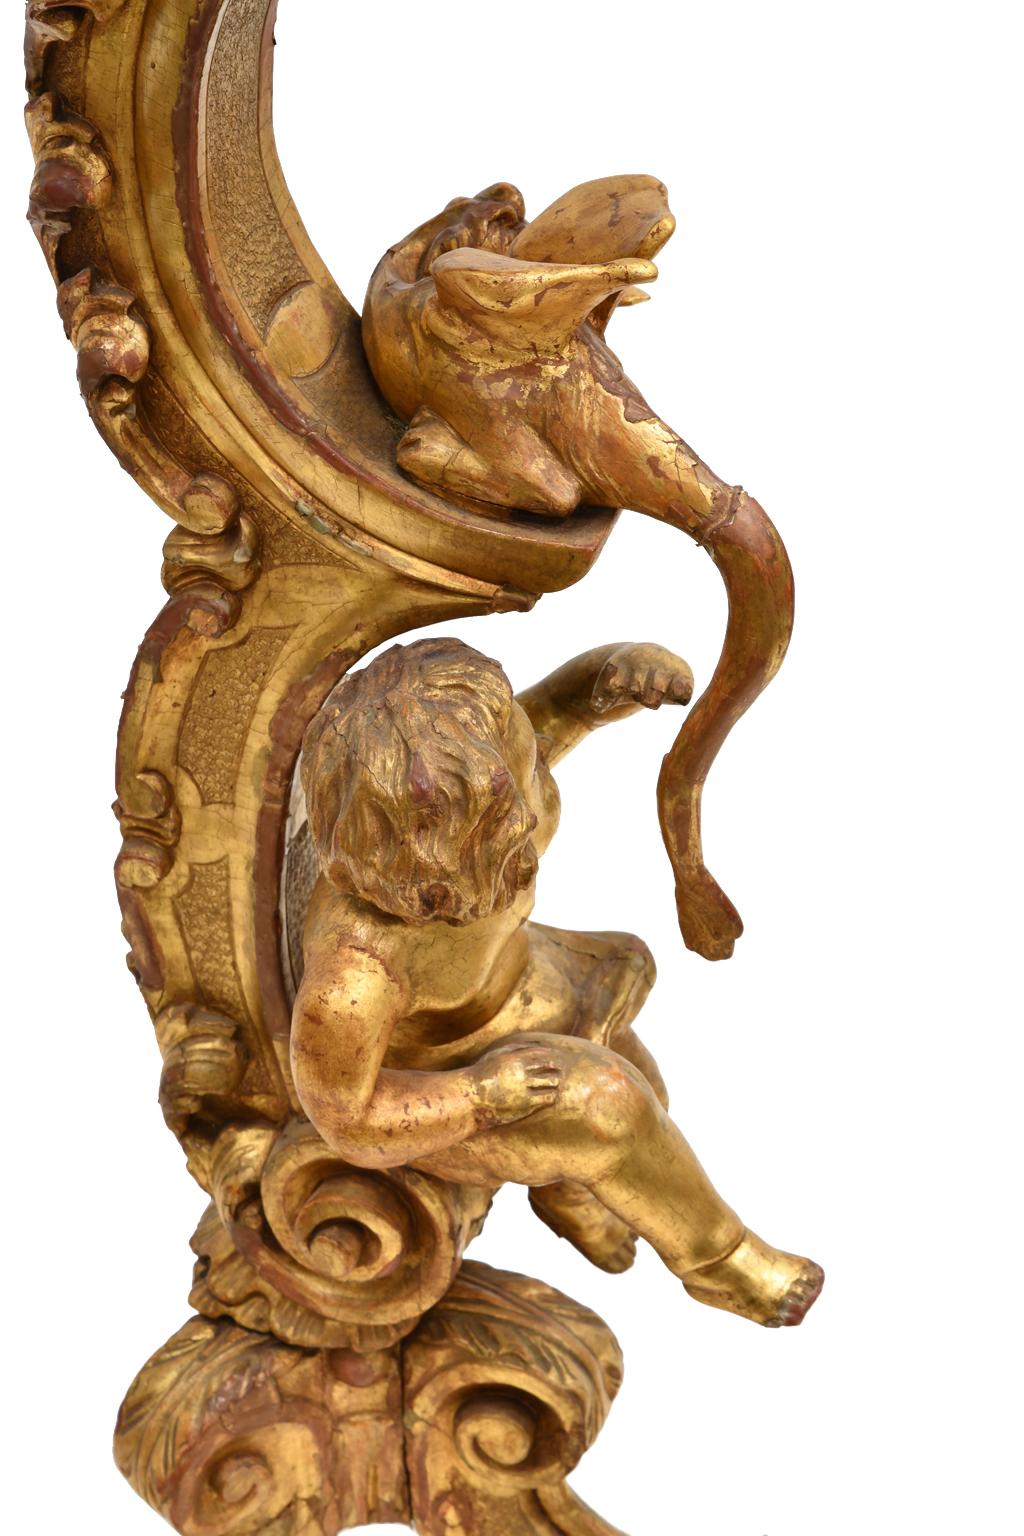 Antique Venetian Trespolo Pedestal Stand in Gilded Wood w/ Carved Dragon & Putto 5